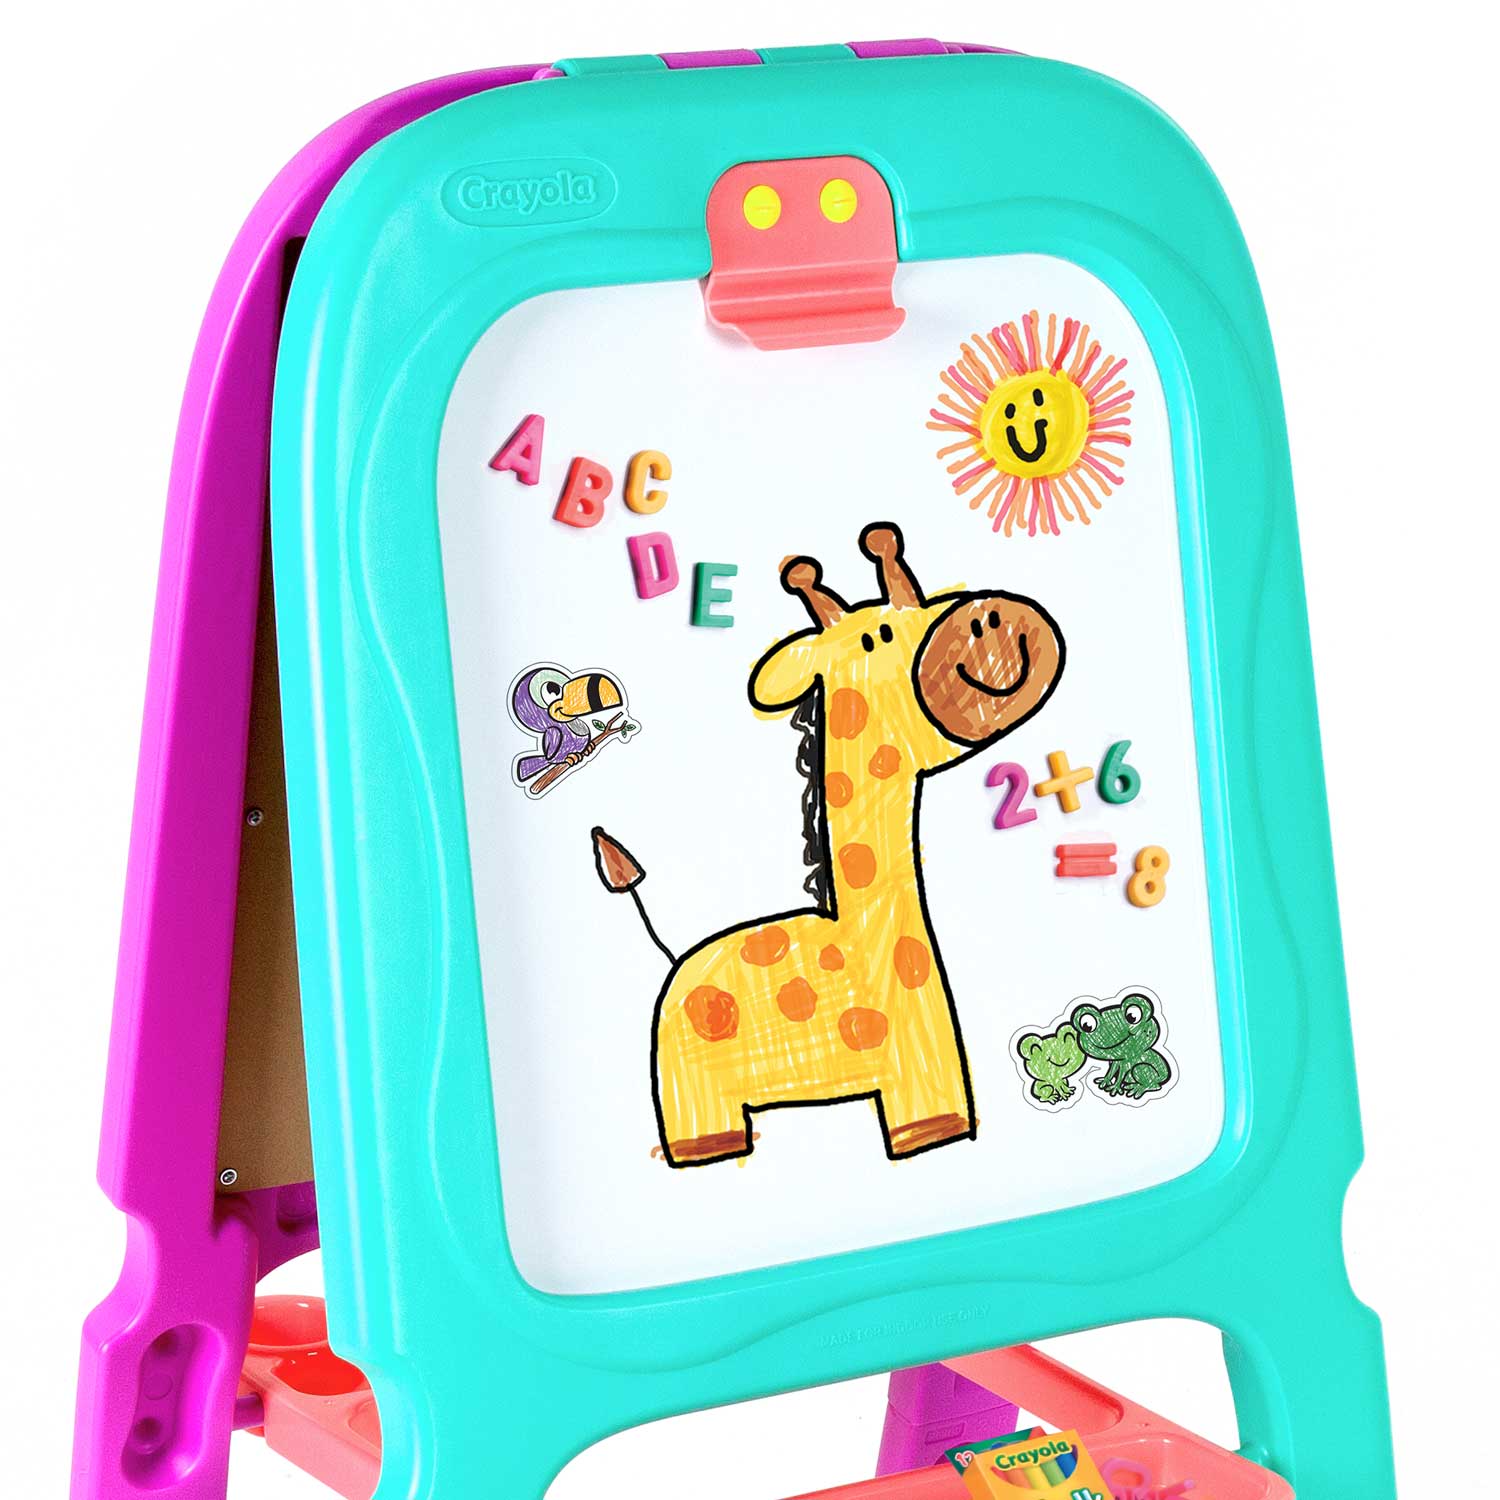 Crayola Purple & Turquoise 3-in-1 Double Easel With Storage, 77 Magnetic Letters/Numbers + 2 Sticker Sheets - image 5 of 8